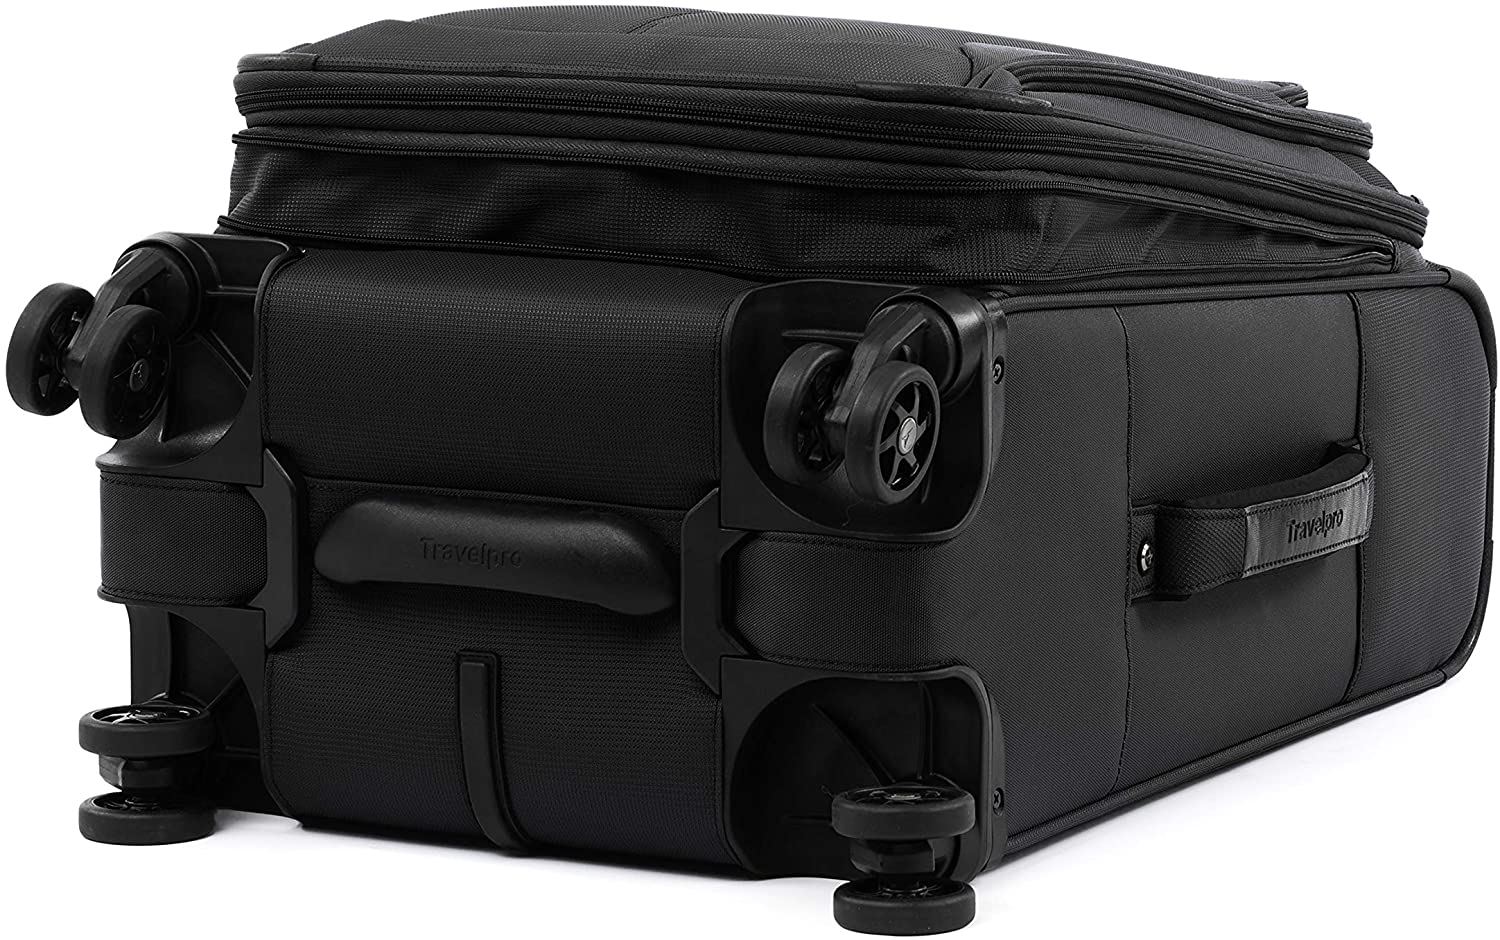 Travelpro TourLite 21" Expandable Spinner Carry-on Black